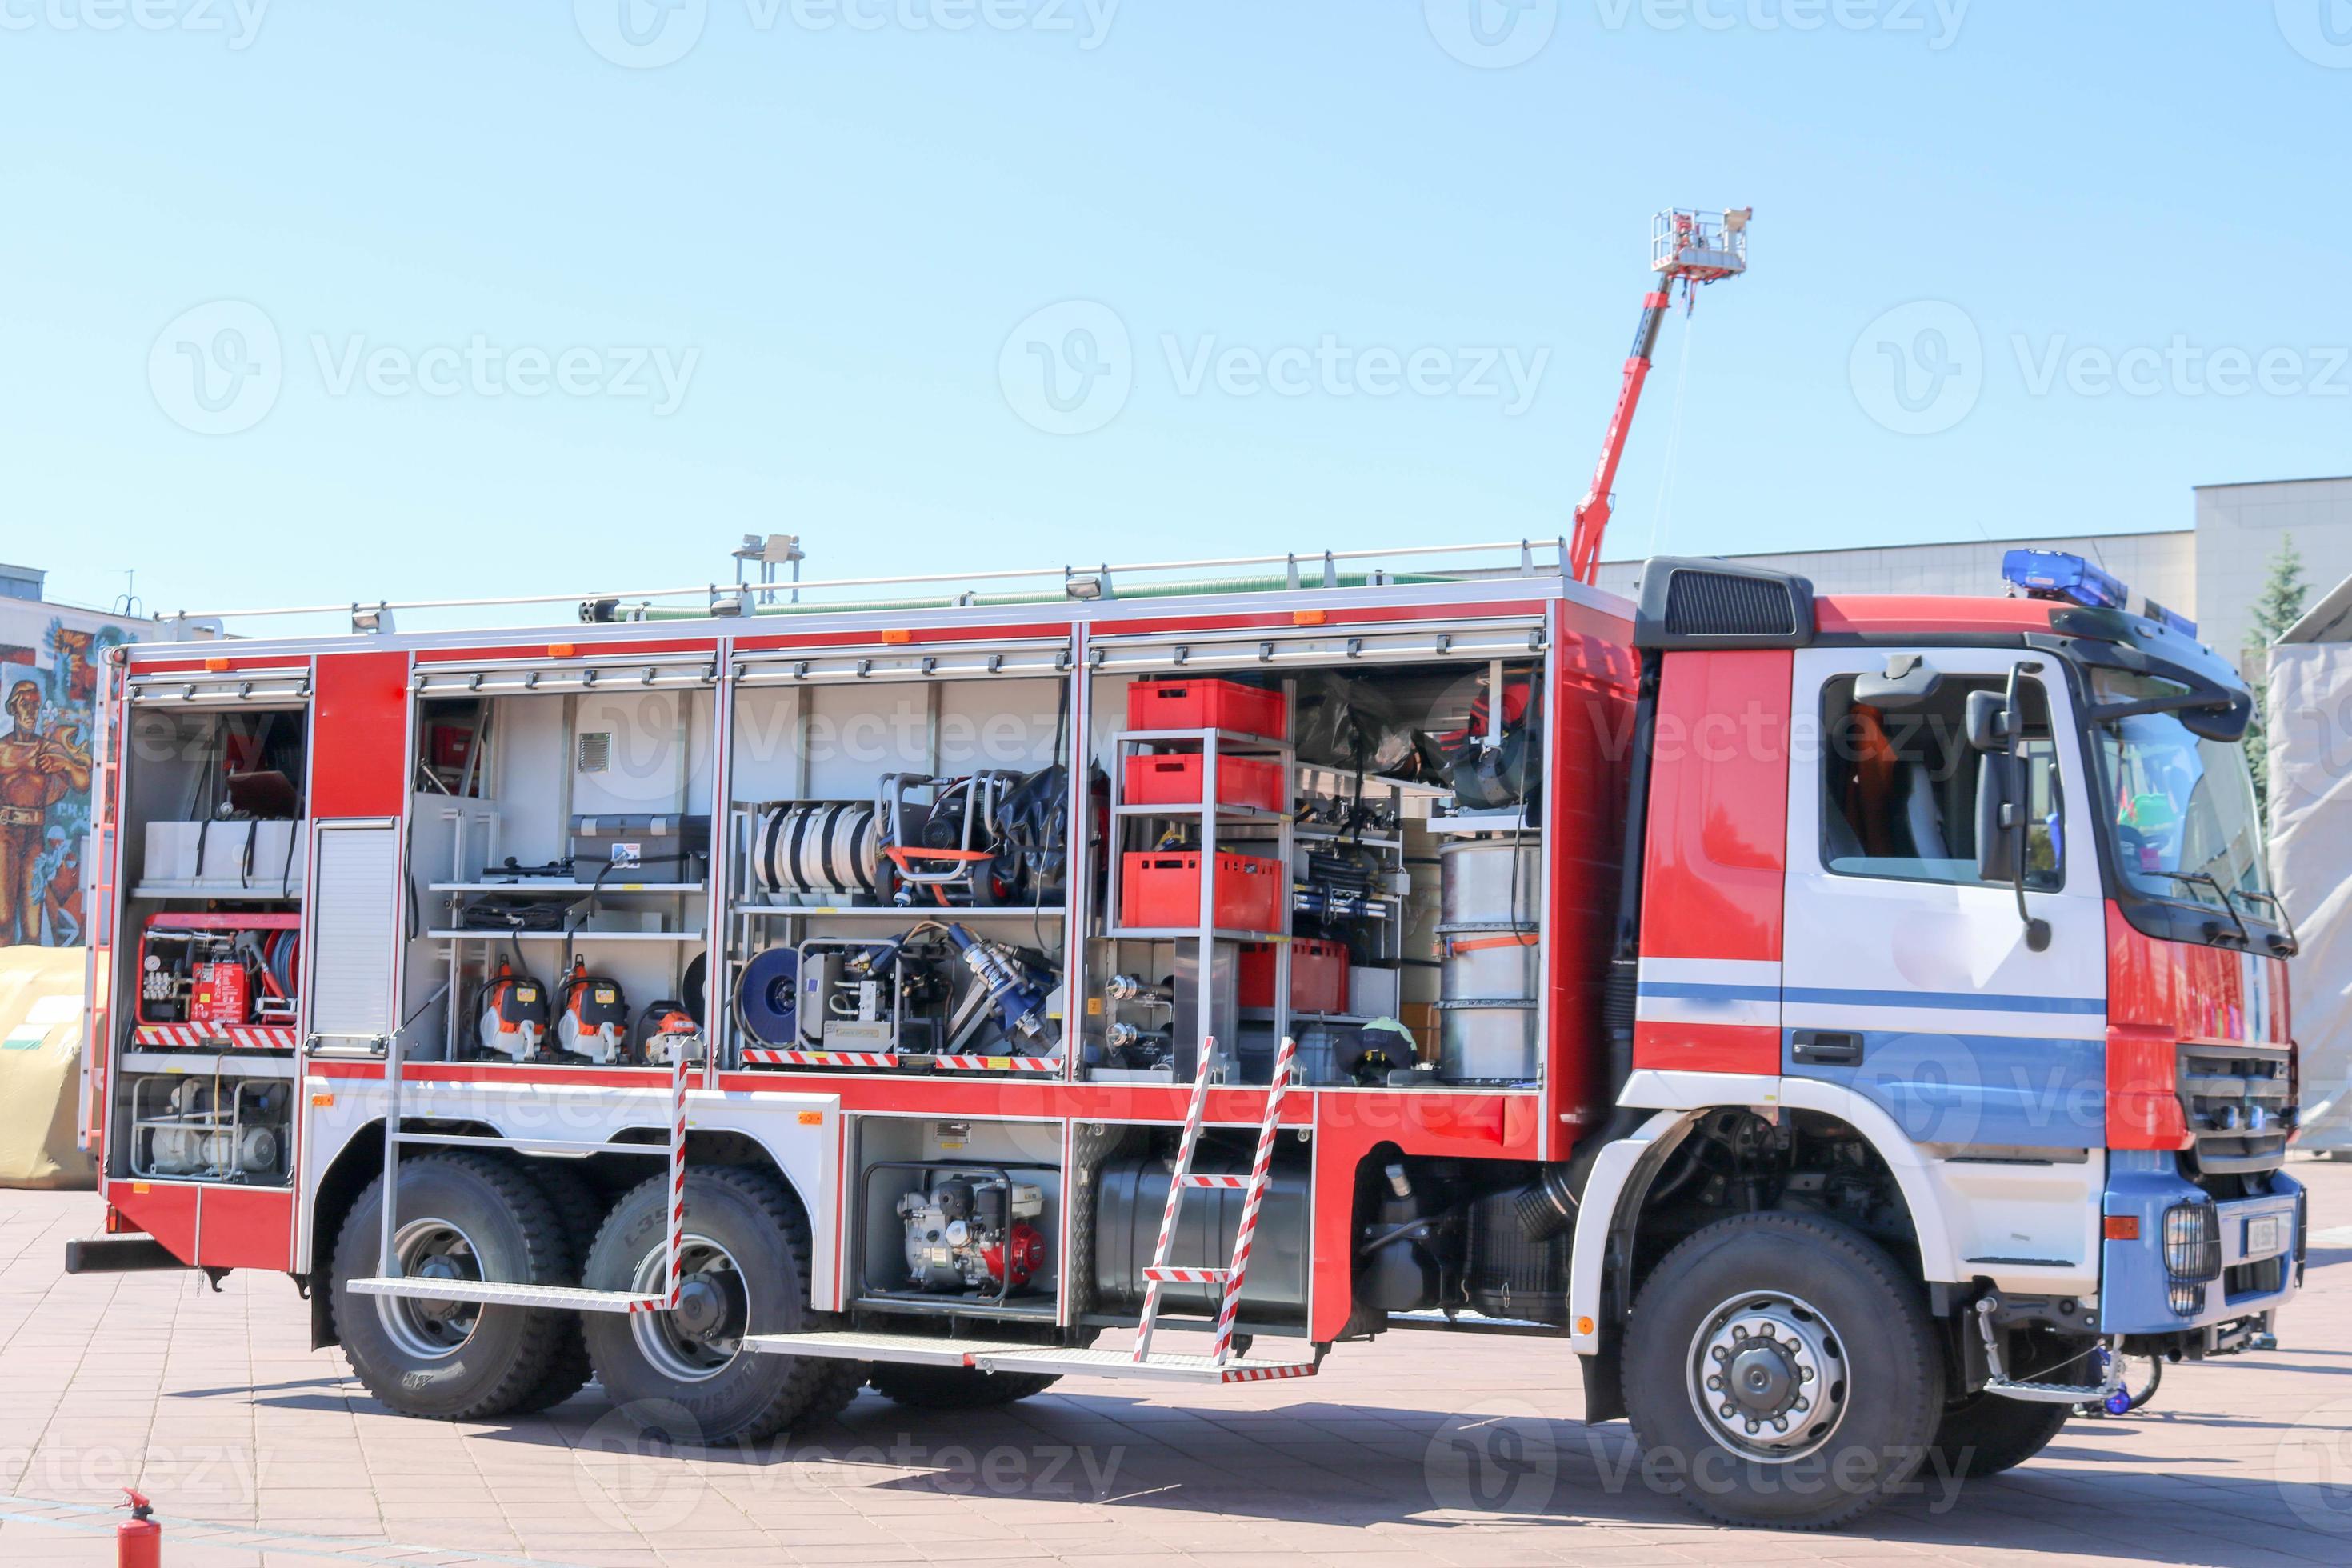 https://static.vecteezy.com/system/resources/previews/014/273/914/large_2x/large-special-red-with-blue-fire-car-engine-to-rescue-people-with-open-sides-and-extinguishing-equipment-fire-pump-blowing-agent-tool-water-sleeves-hoses-baloons-equipmen-photo.jpg